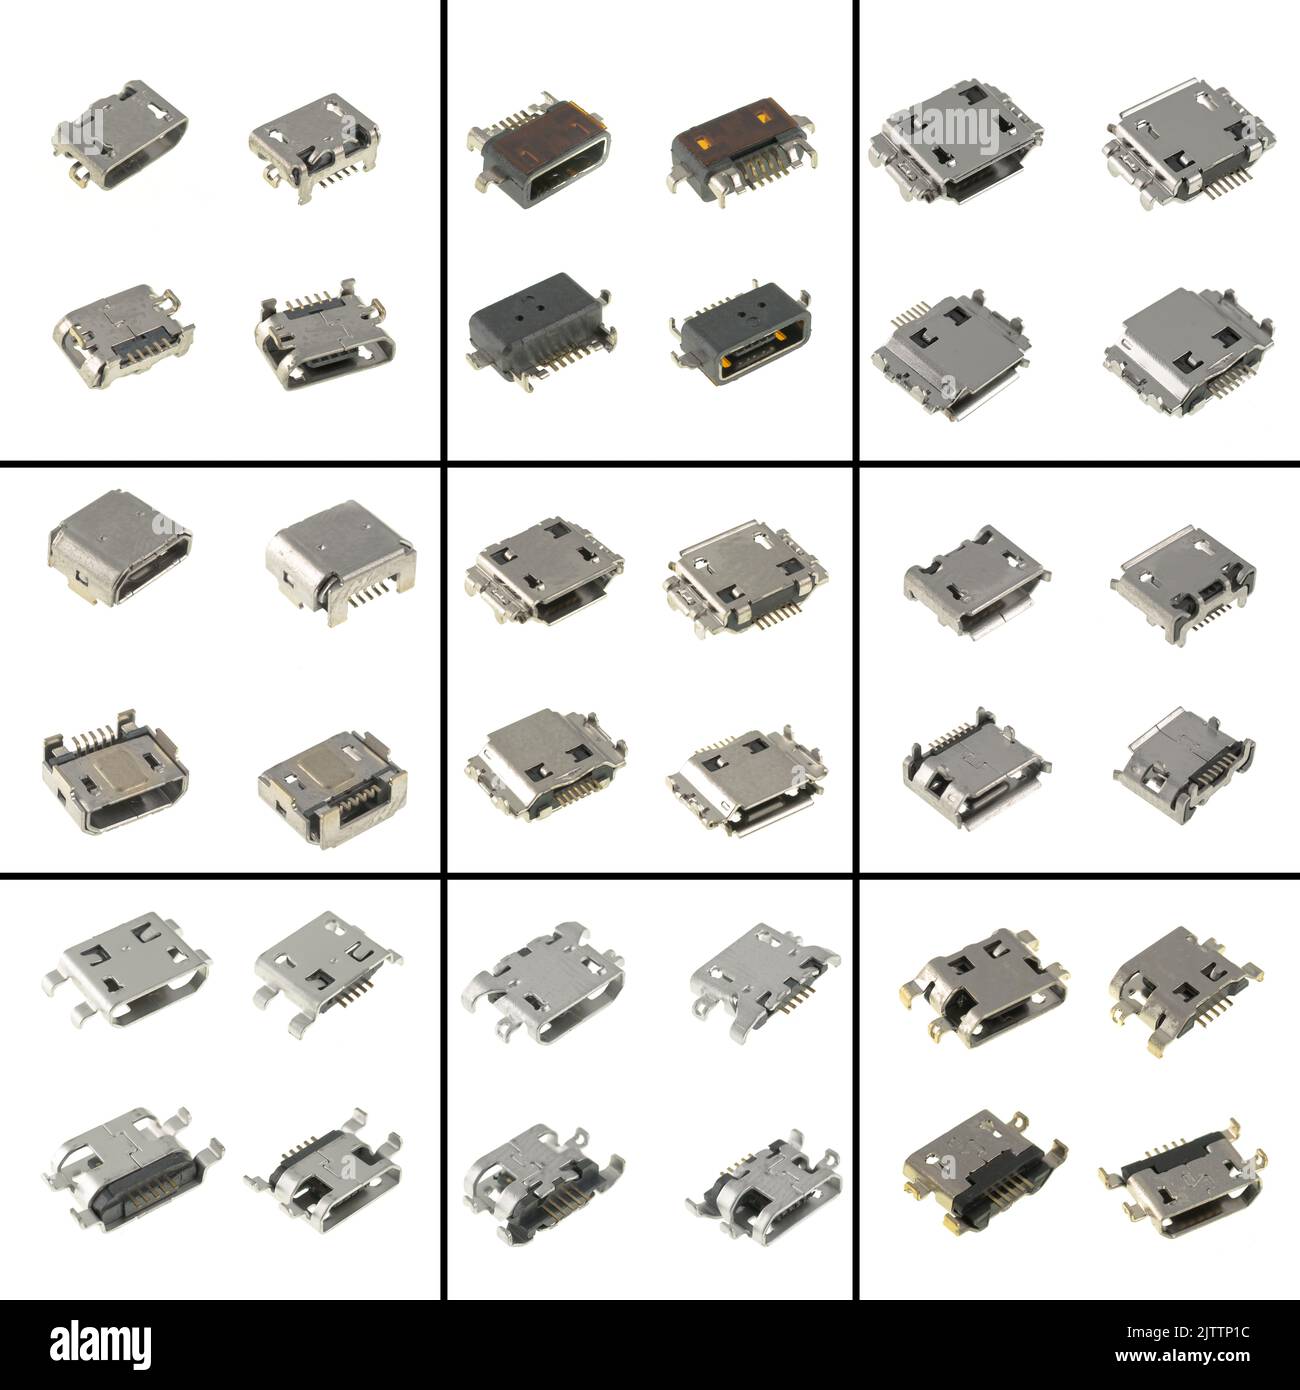 connector Micro-USB socket, collage of Micro-USB connectors, spare part for phone tablet, isolated on white background Stock Photo